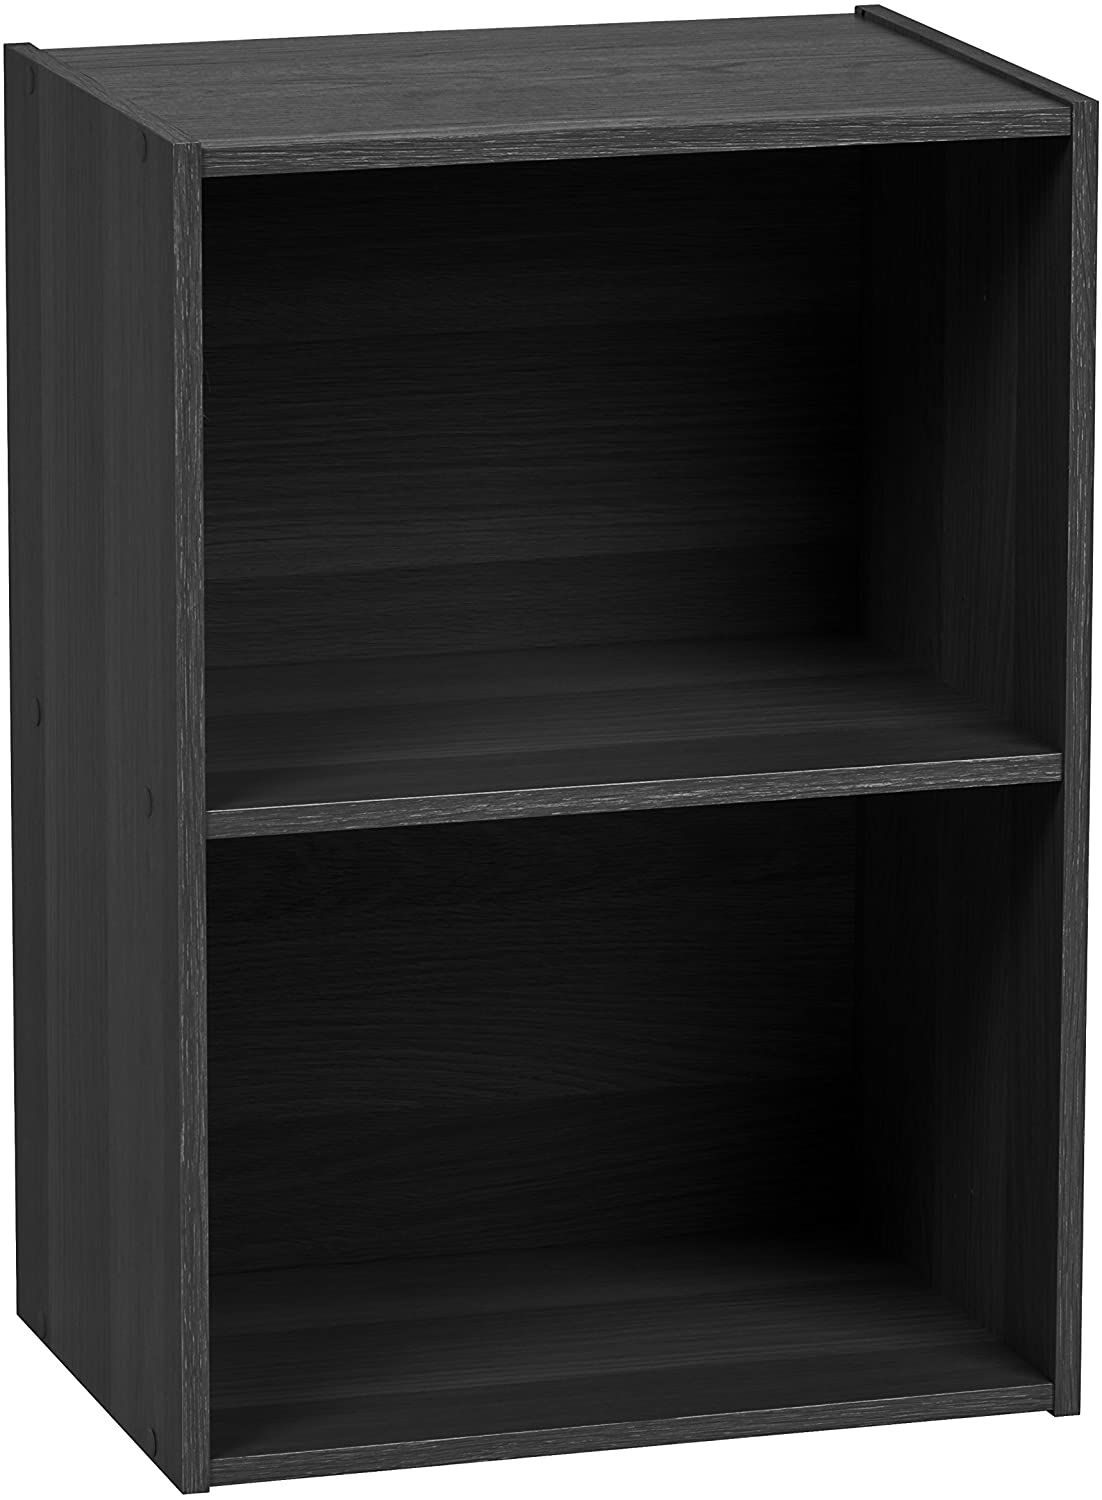 Iris Usa 2 Tier Wood Bookcase Intended For 2 Tier Bookcases (View 5 of 15)